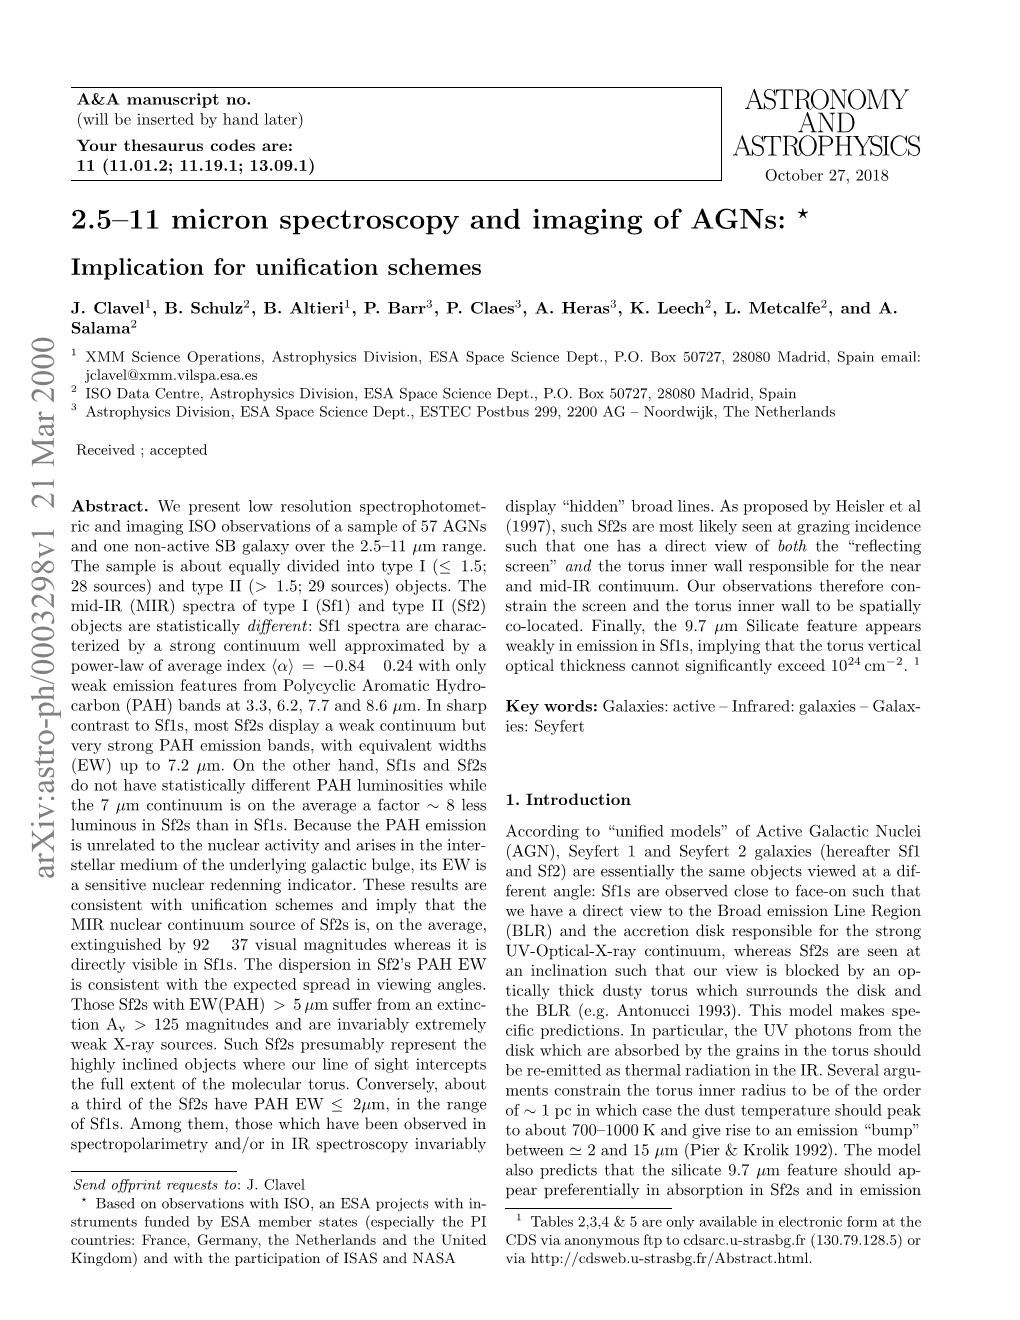 2.5-11 Micron Spectroscopy and Imaging of Agns: Implication For